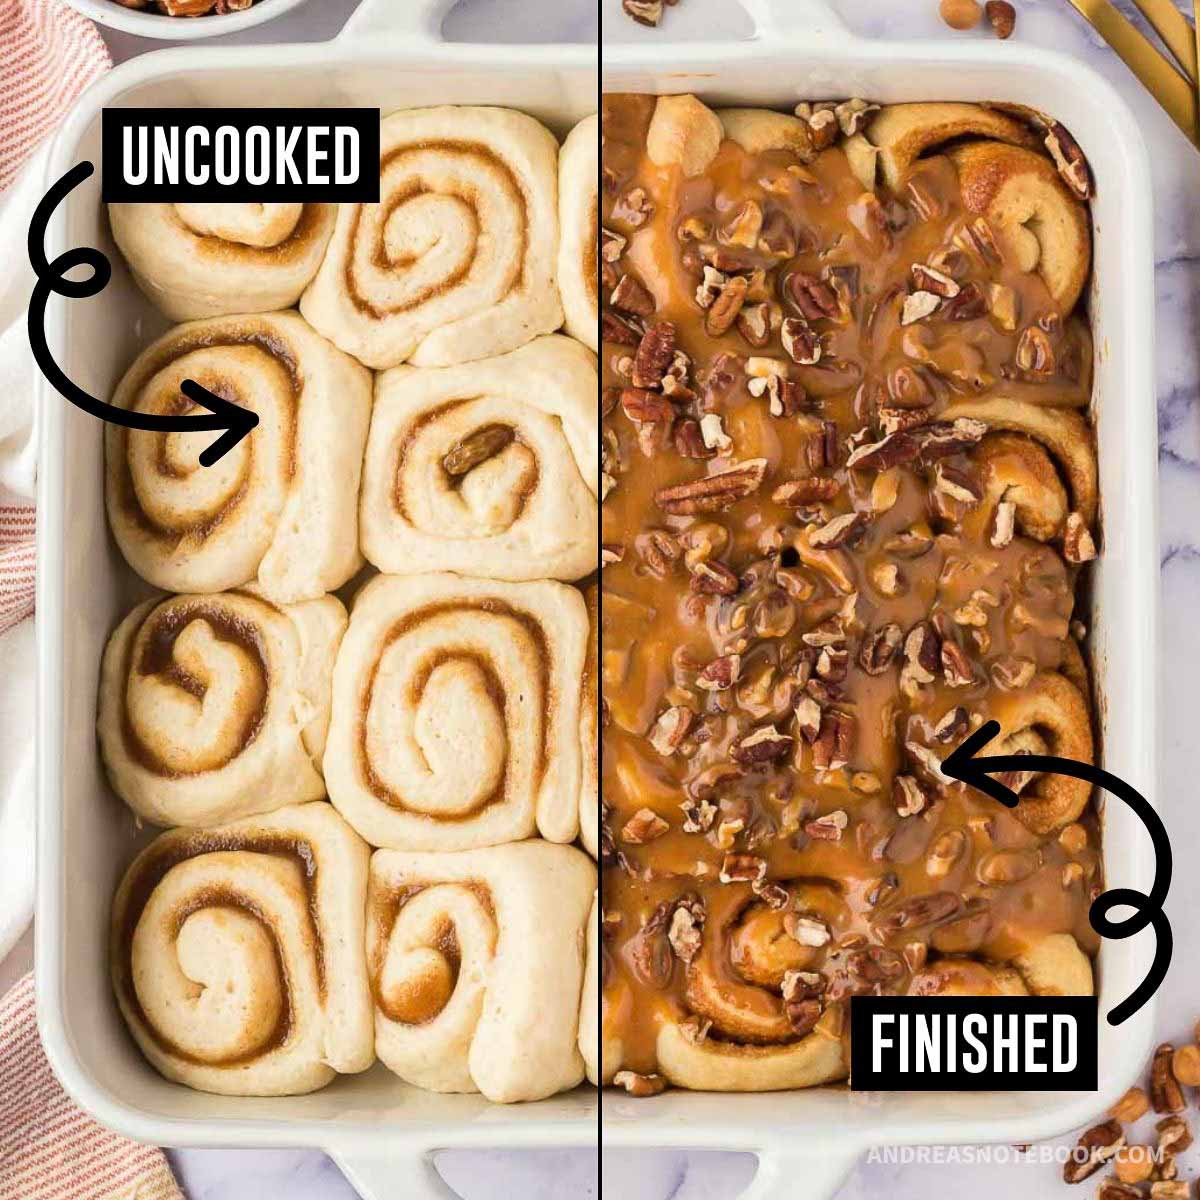 uncooked cinnamon rolls on left, cooked cinnamon rolls with caramel sauce on right.